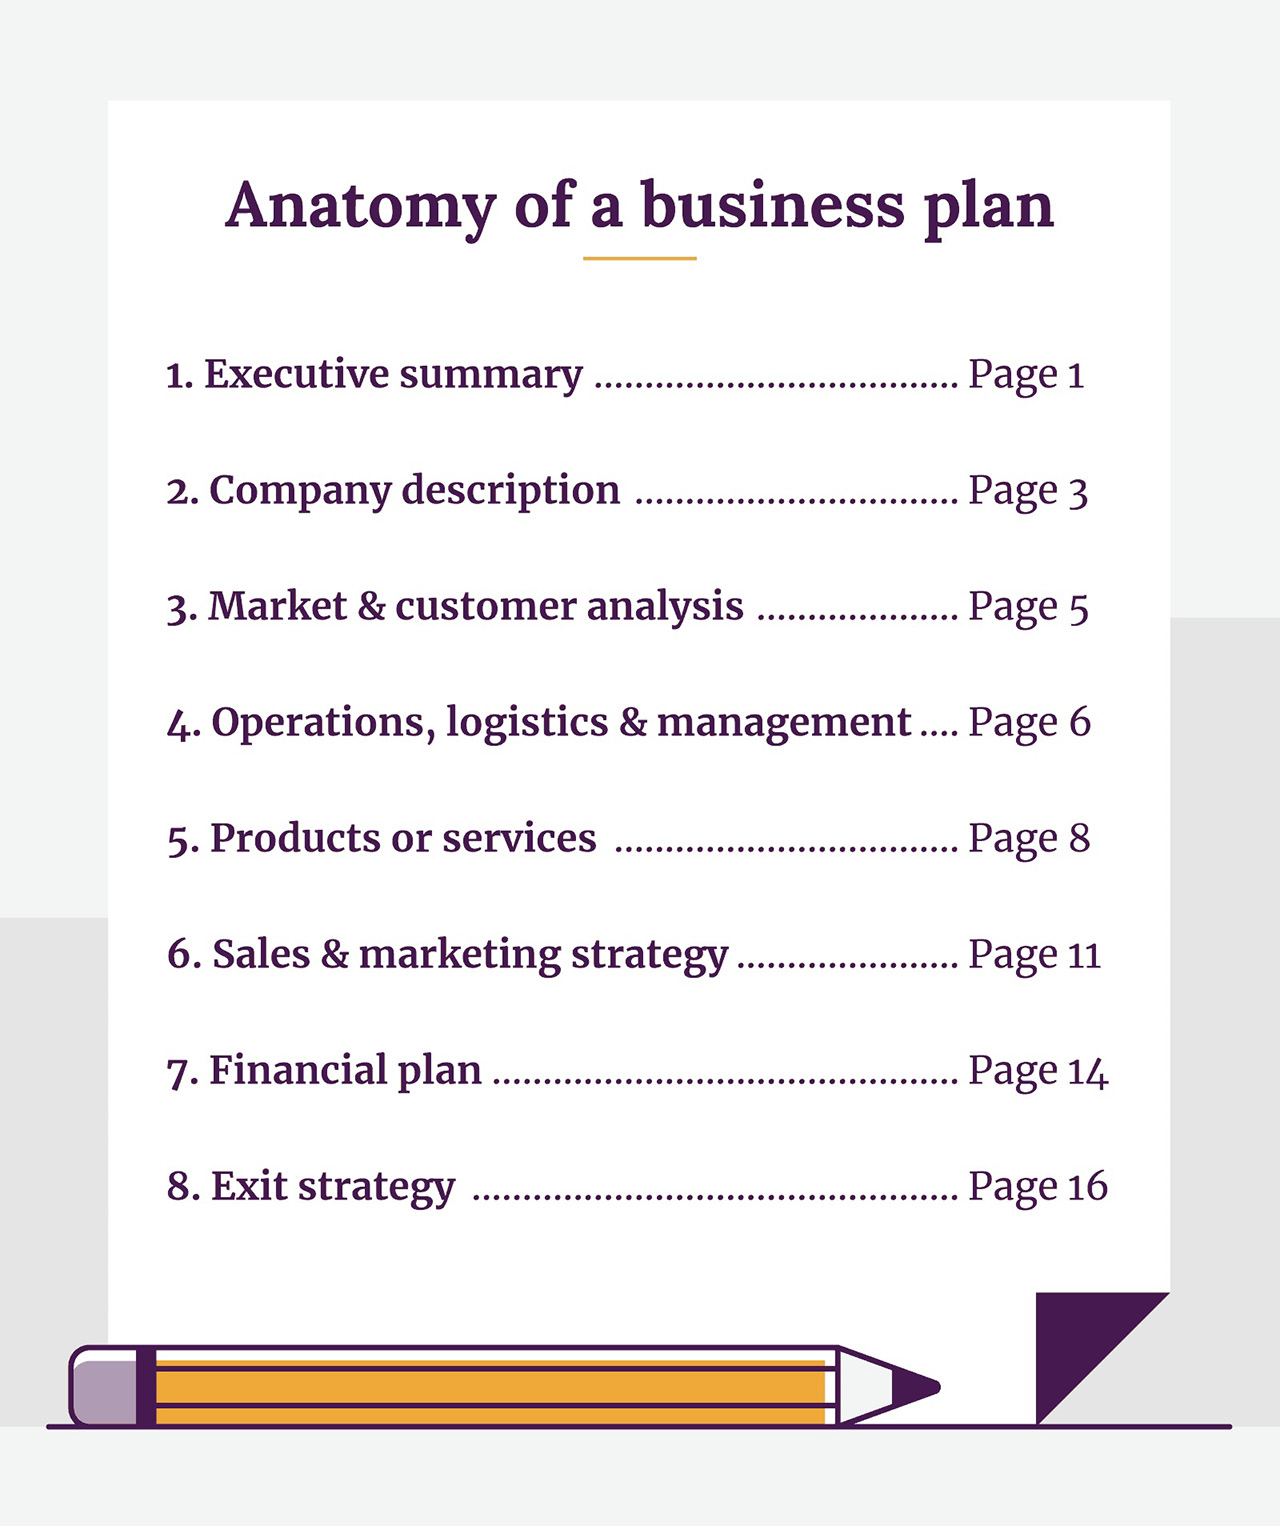 what does a business plan help with